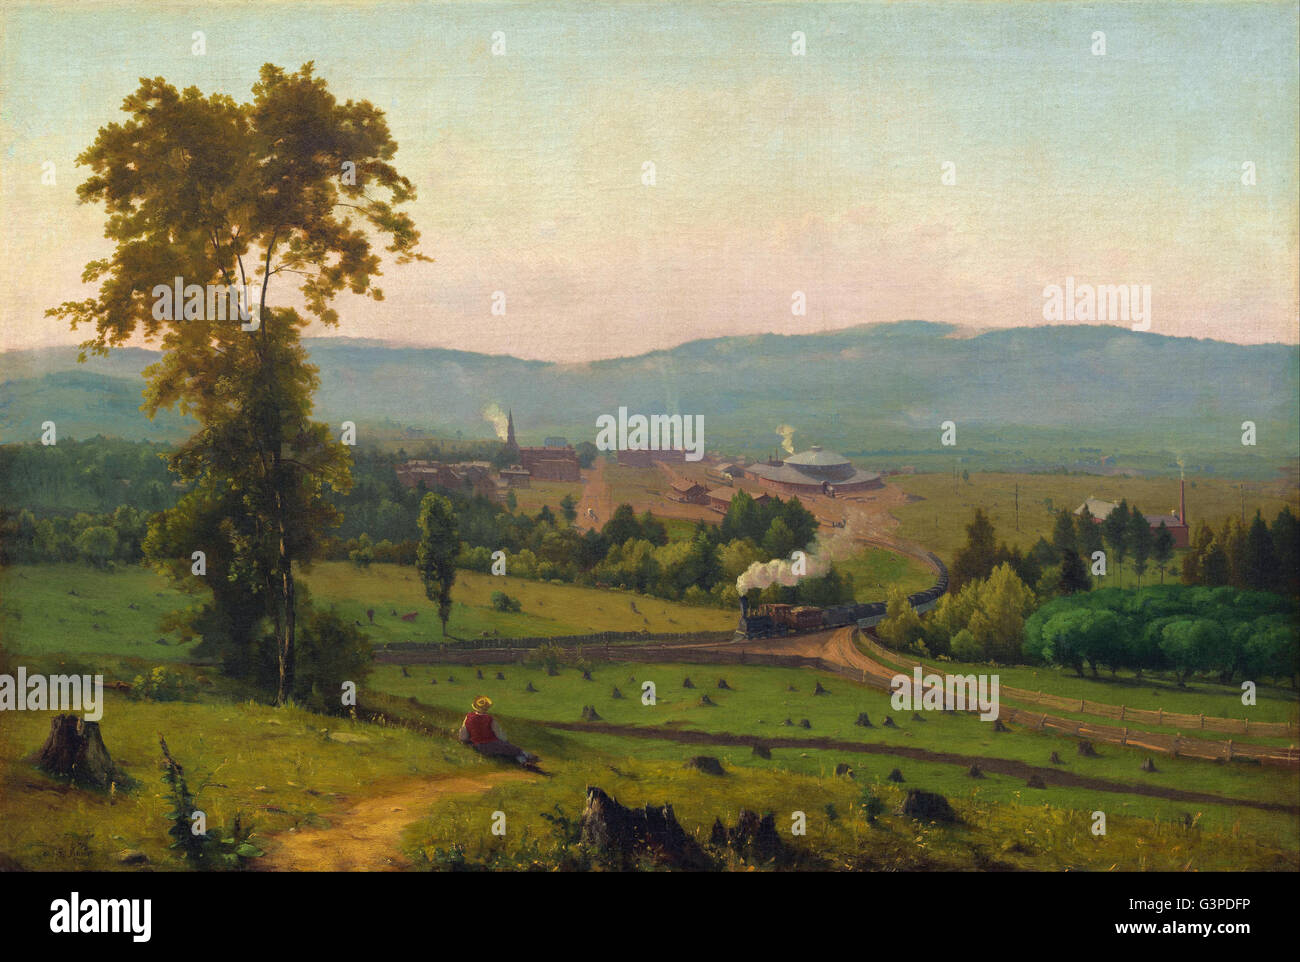 George Inness - The Lackawanna Valley - National Gallery of Art, Washington DC Stock Photo